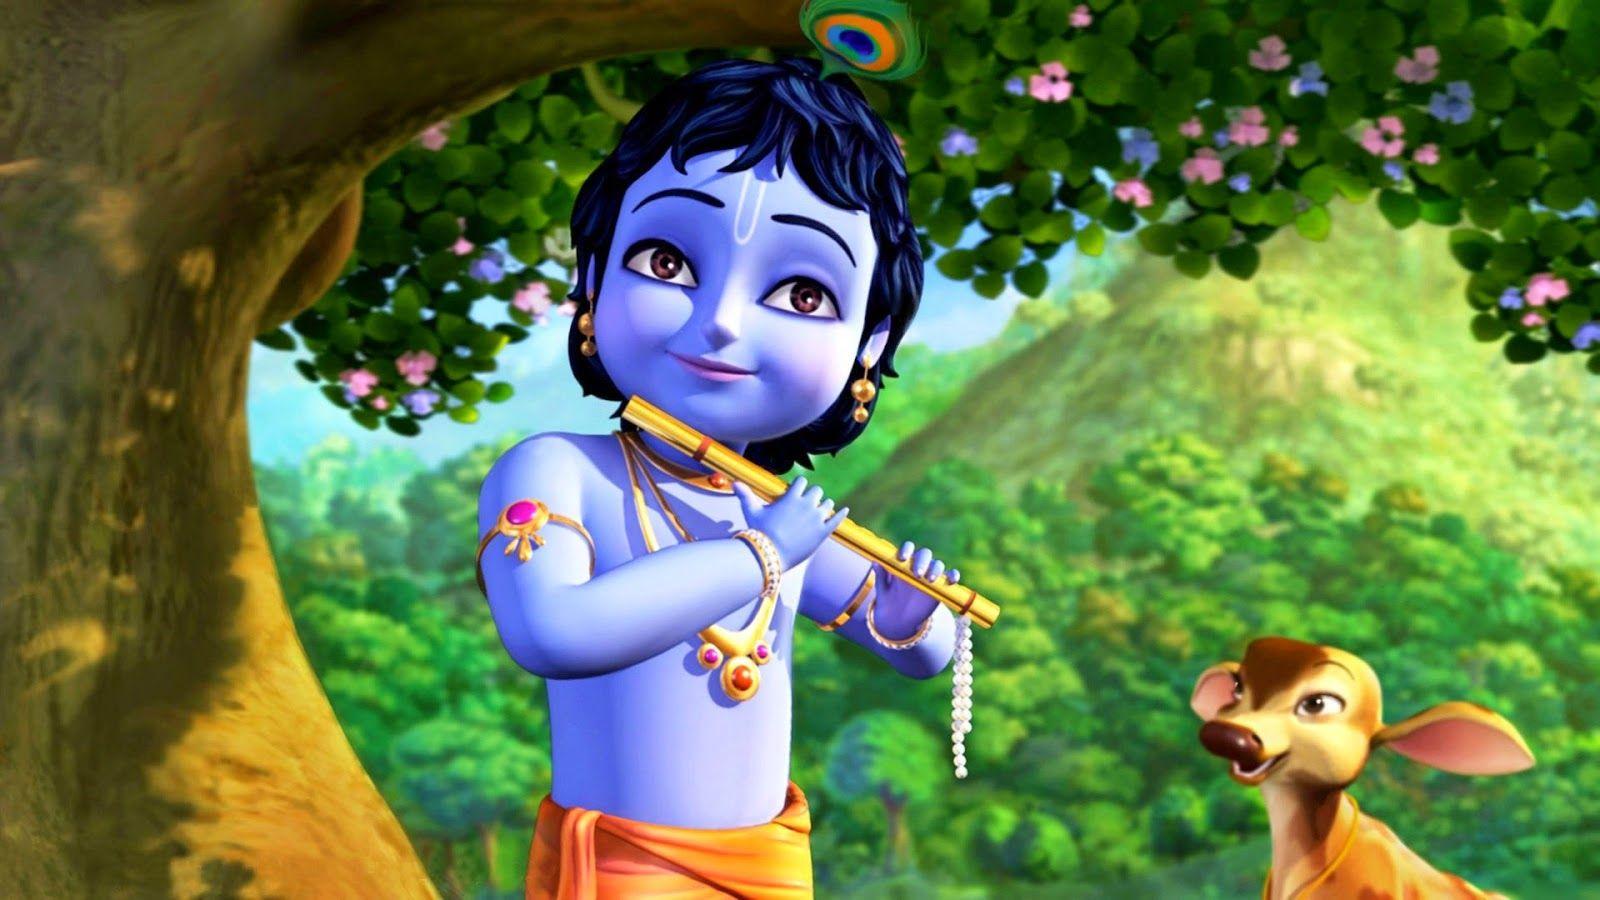 Animated Lord Krishna Images Hd 1080p